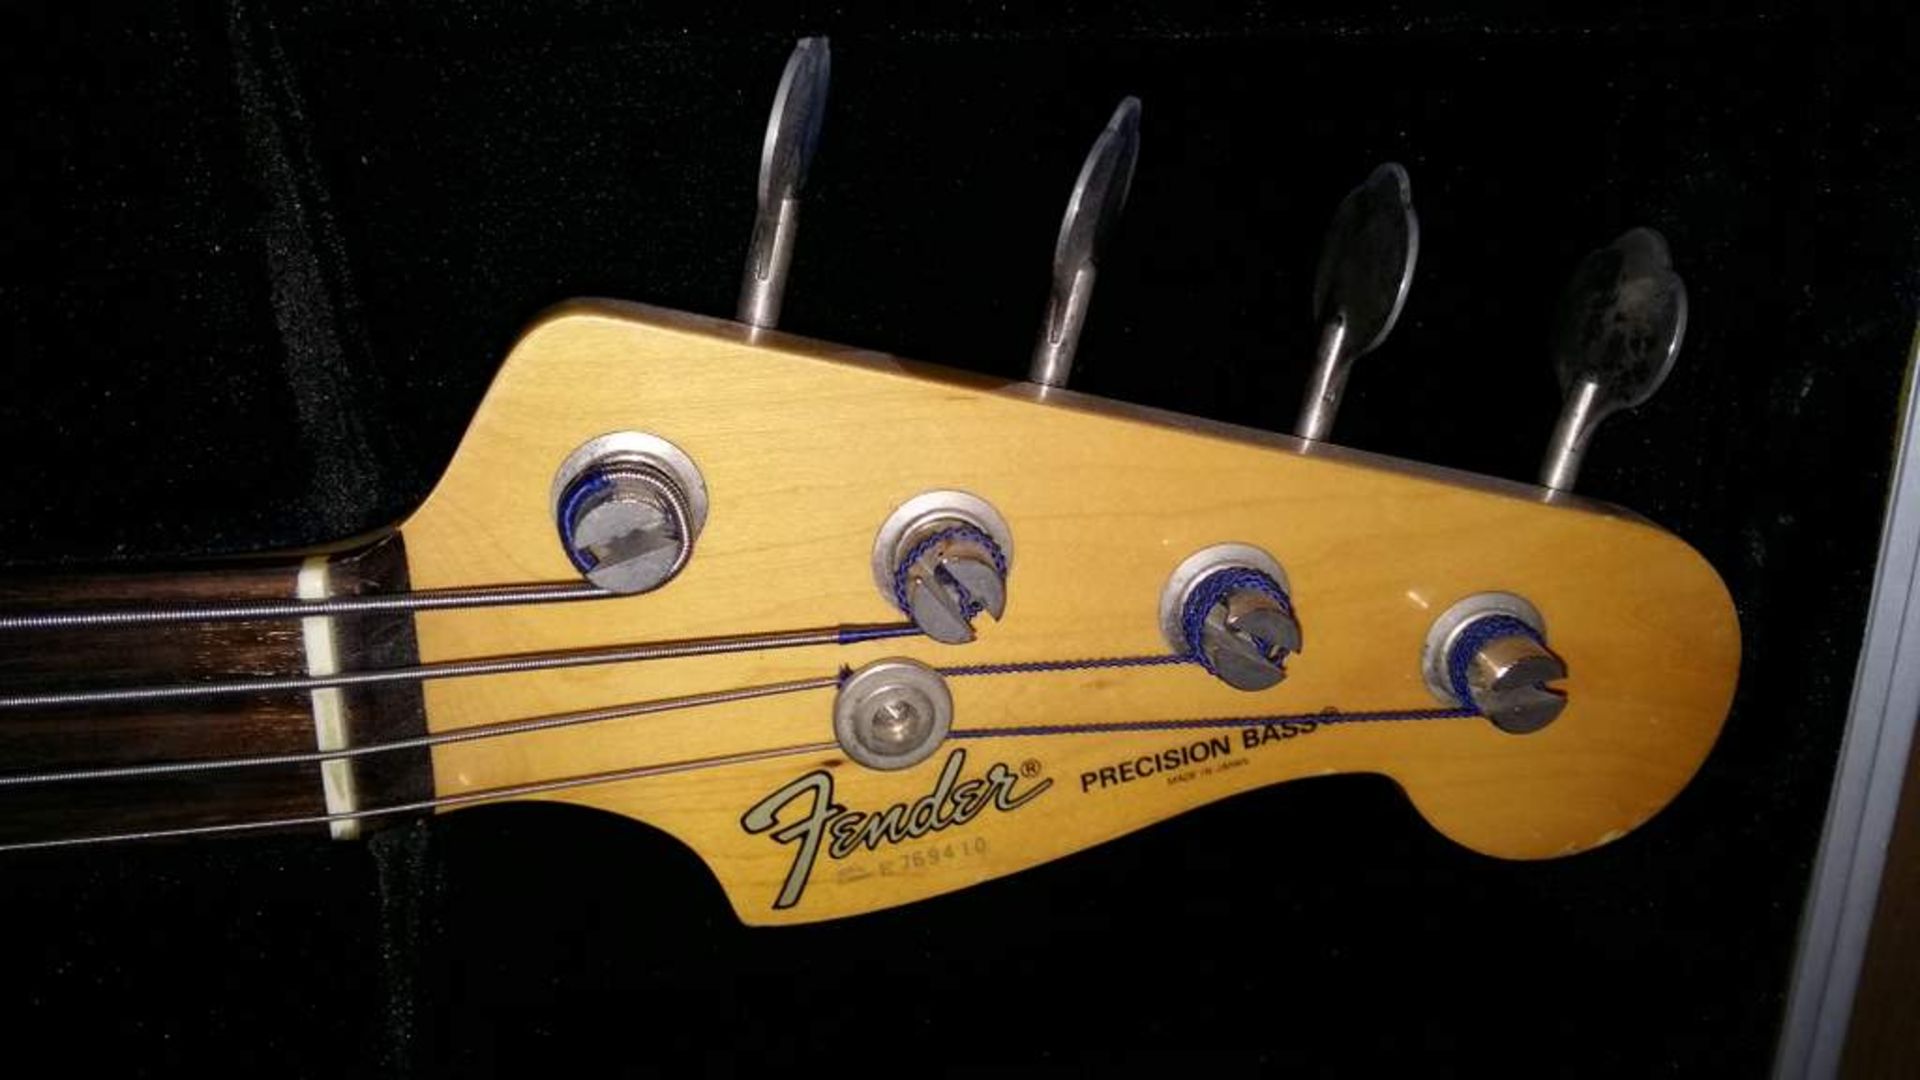 Fender 4 string bass guitar in carry case - Image 3 of 4